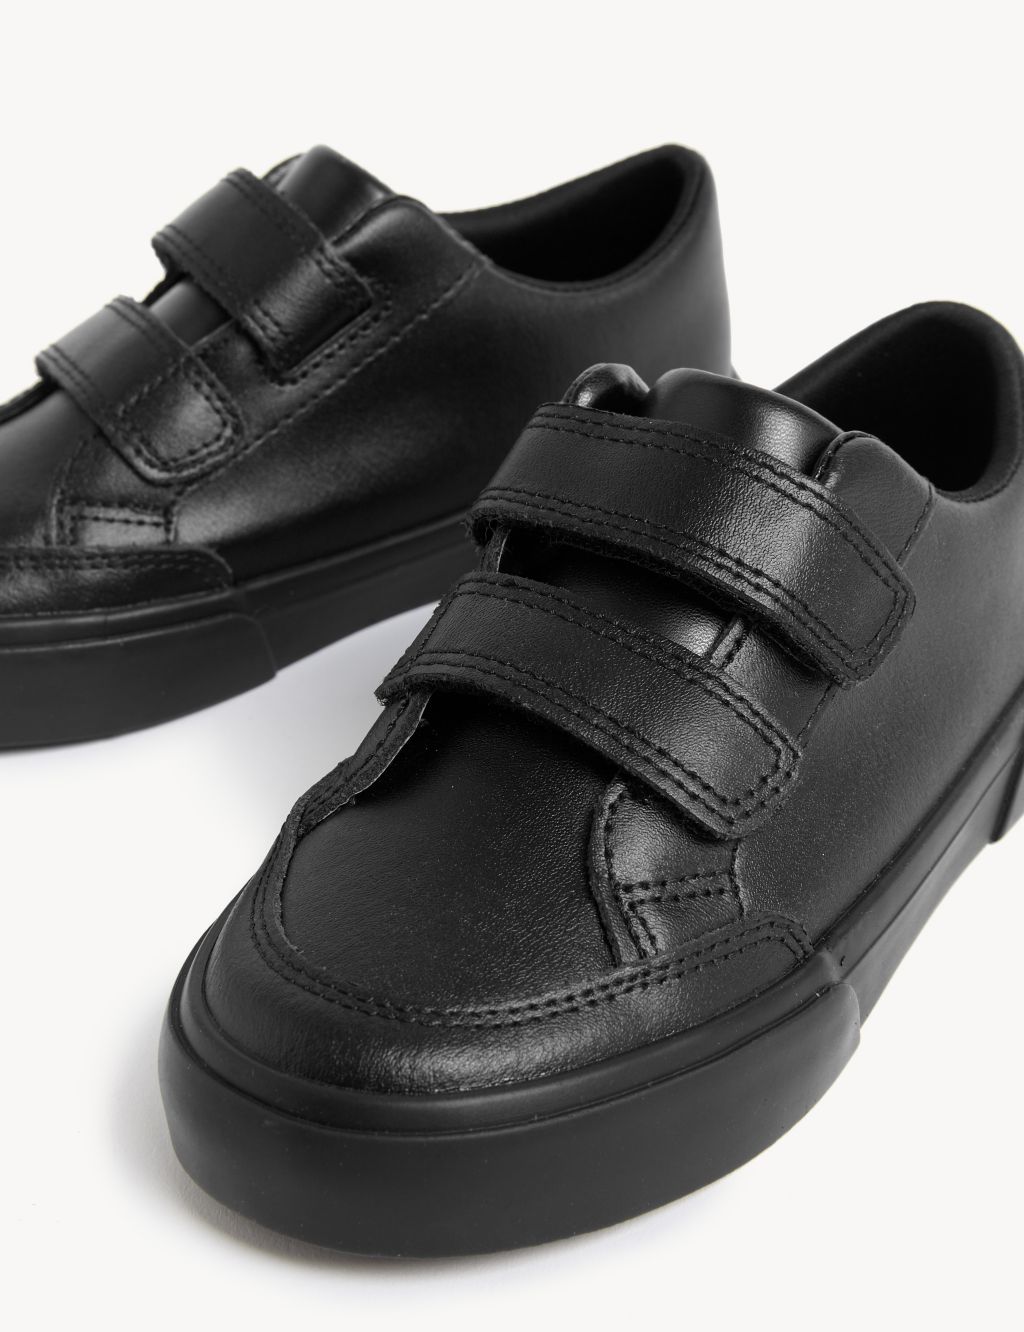 Kids' Leather Freshfeet™ School Shoes (8 Small - 2 Large) image 2